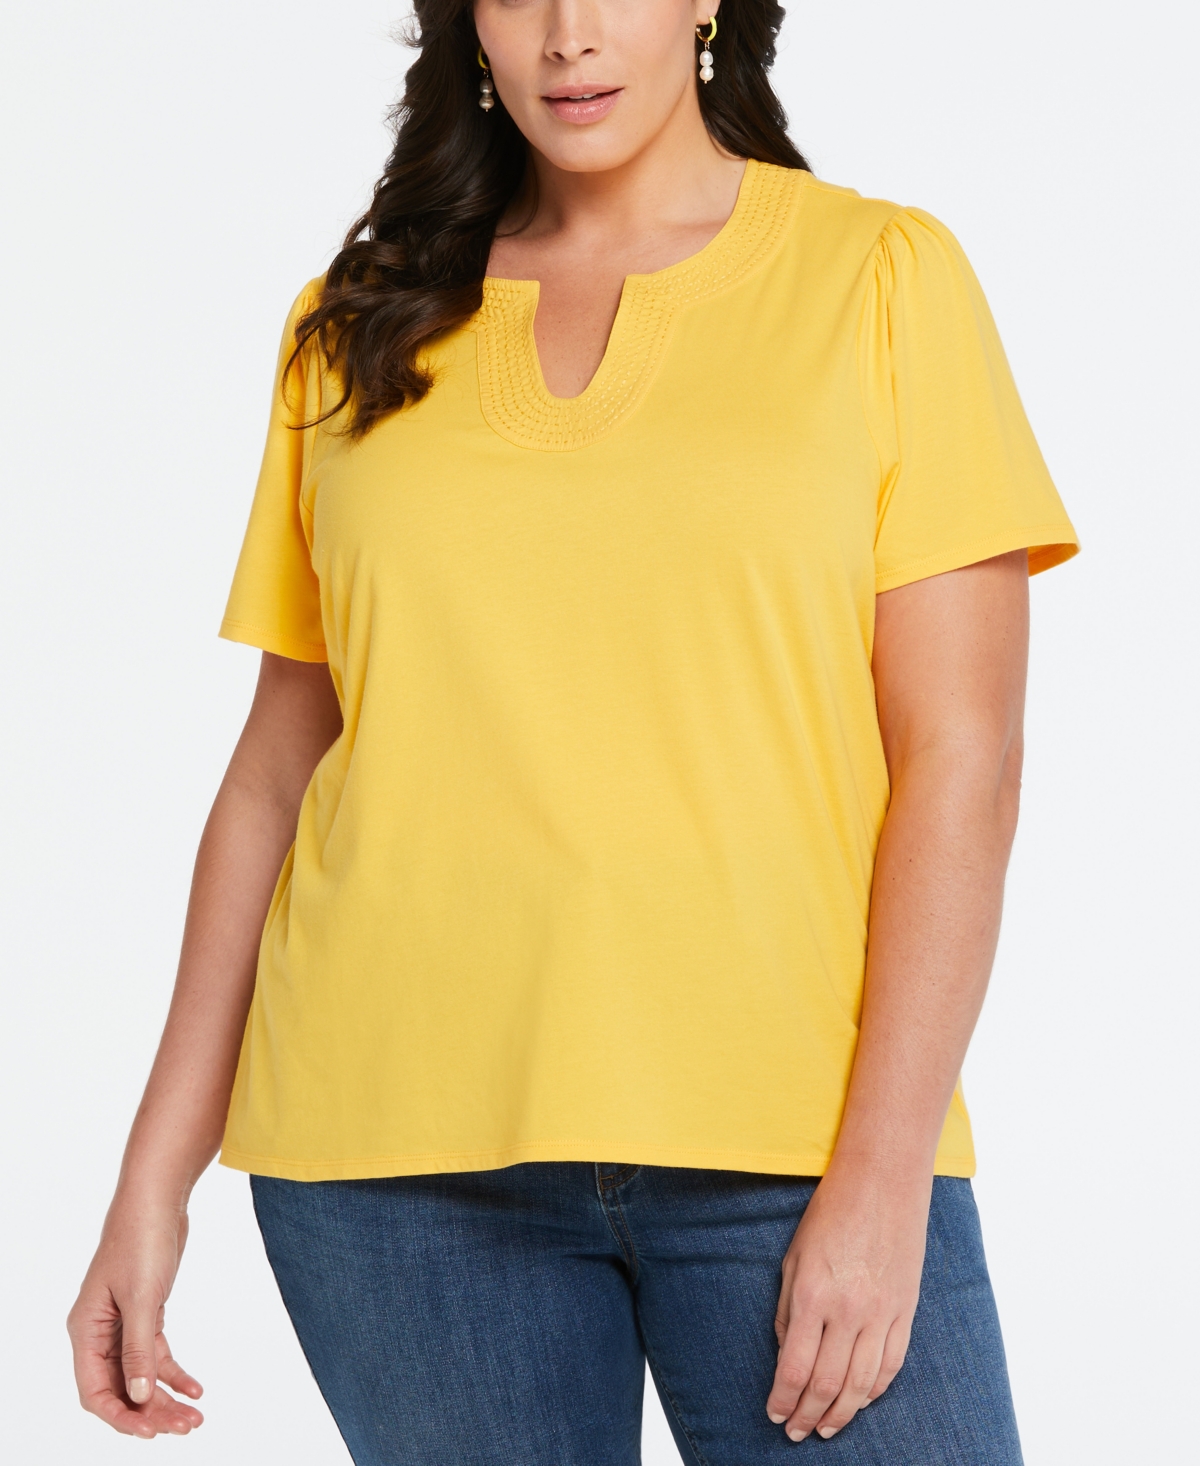 Plus Size Cotton Jersey Top with Woven Trim - Amber Yellow